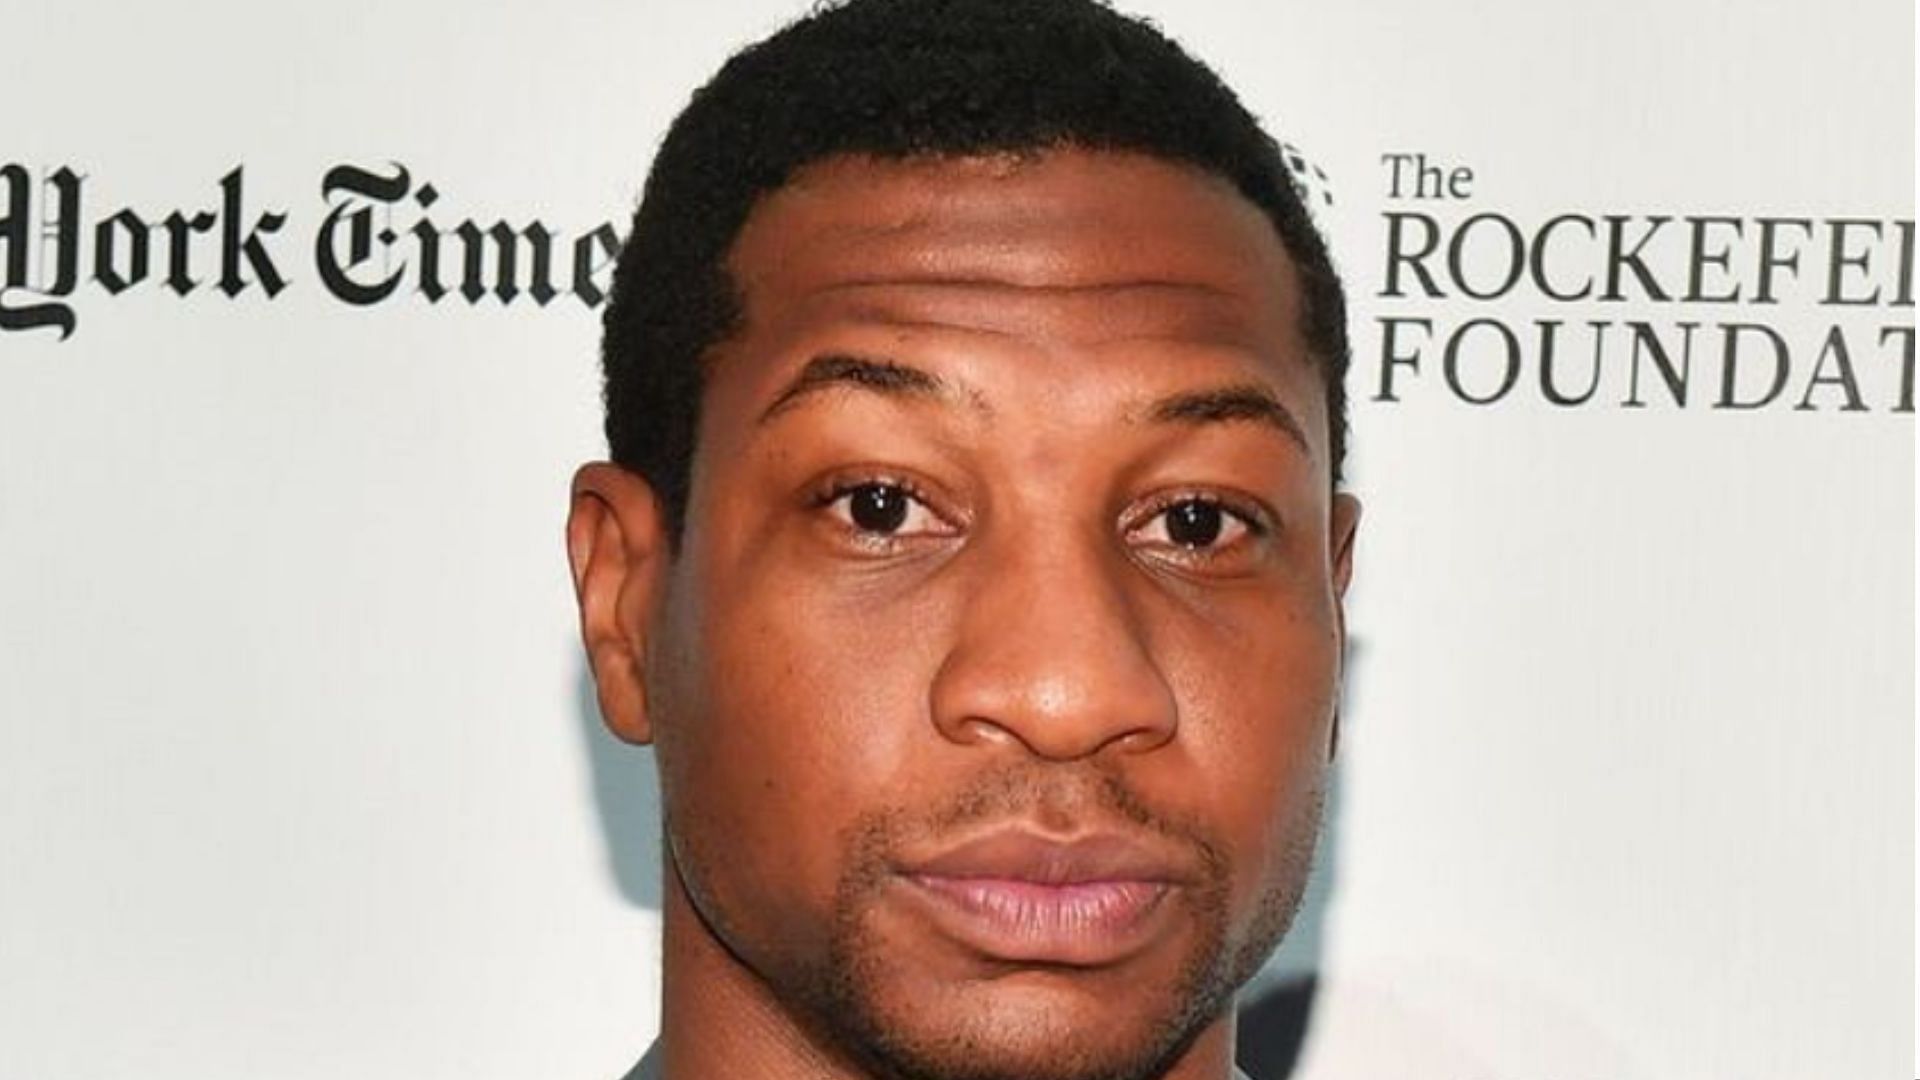 Jonathan Majors was arrested on March 25 after a domestic abuse complaint. (Image via Instagram/jonathanmajor_)